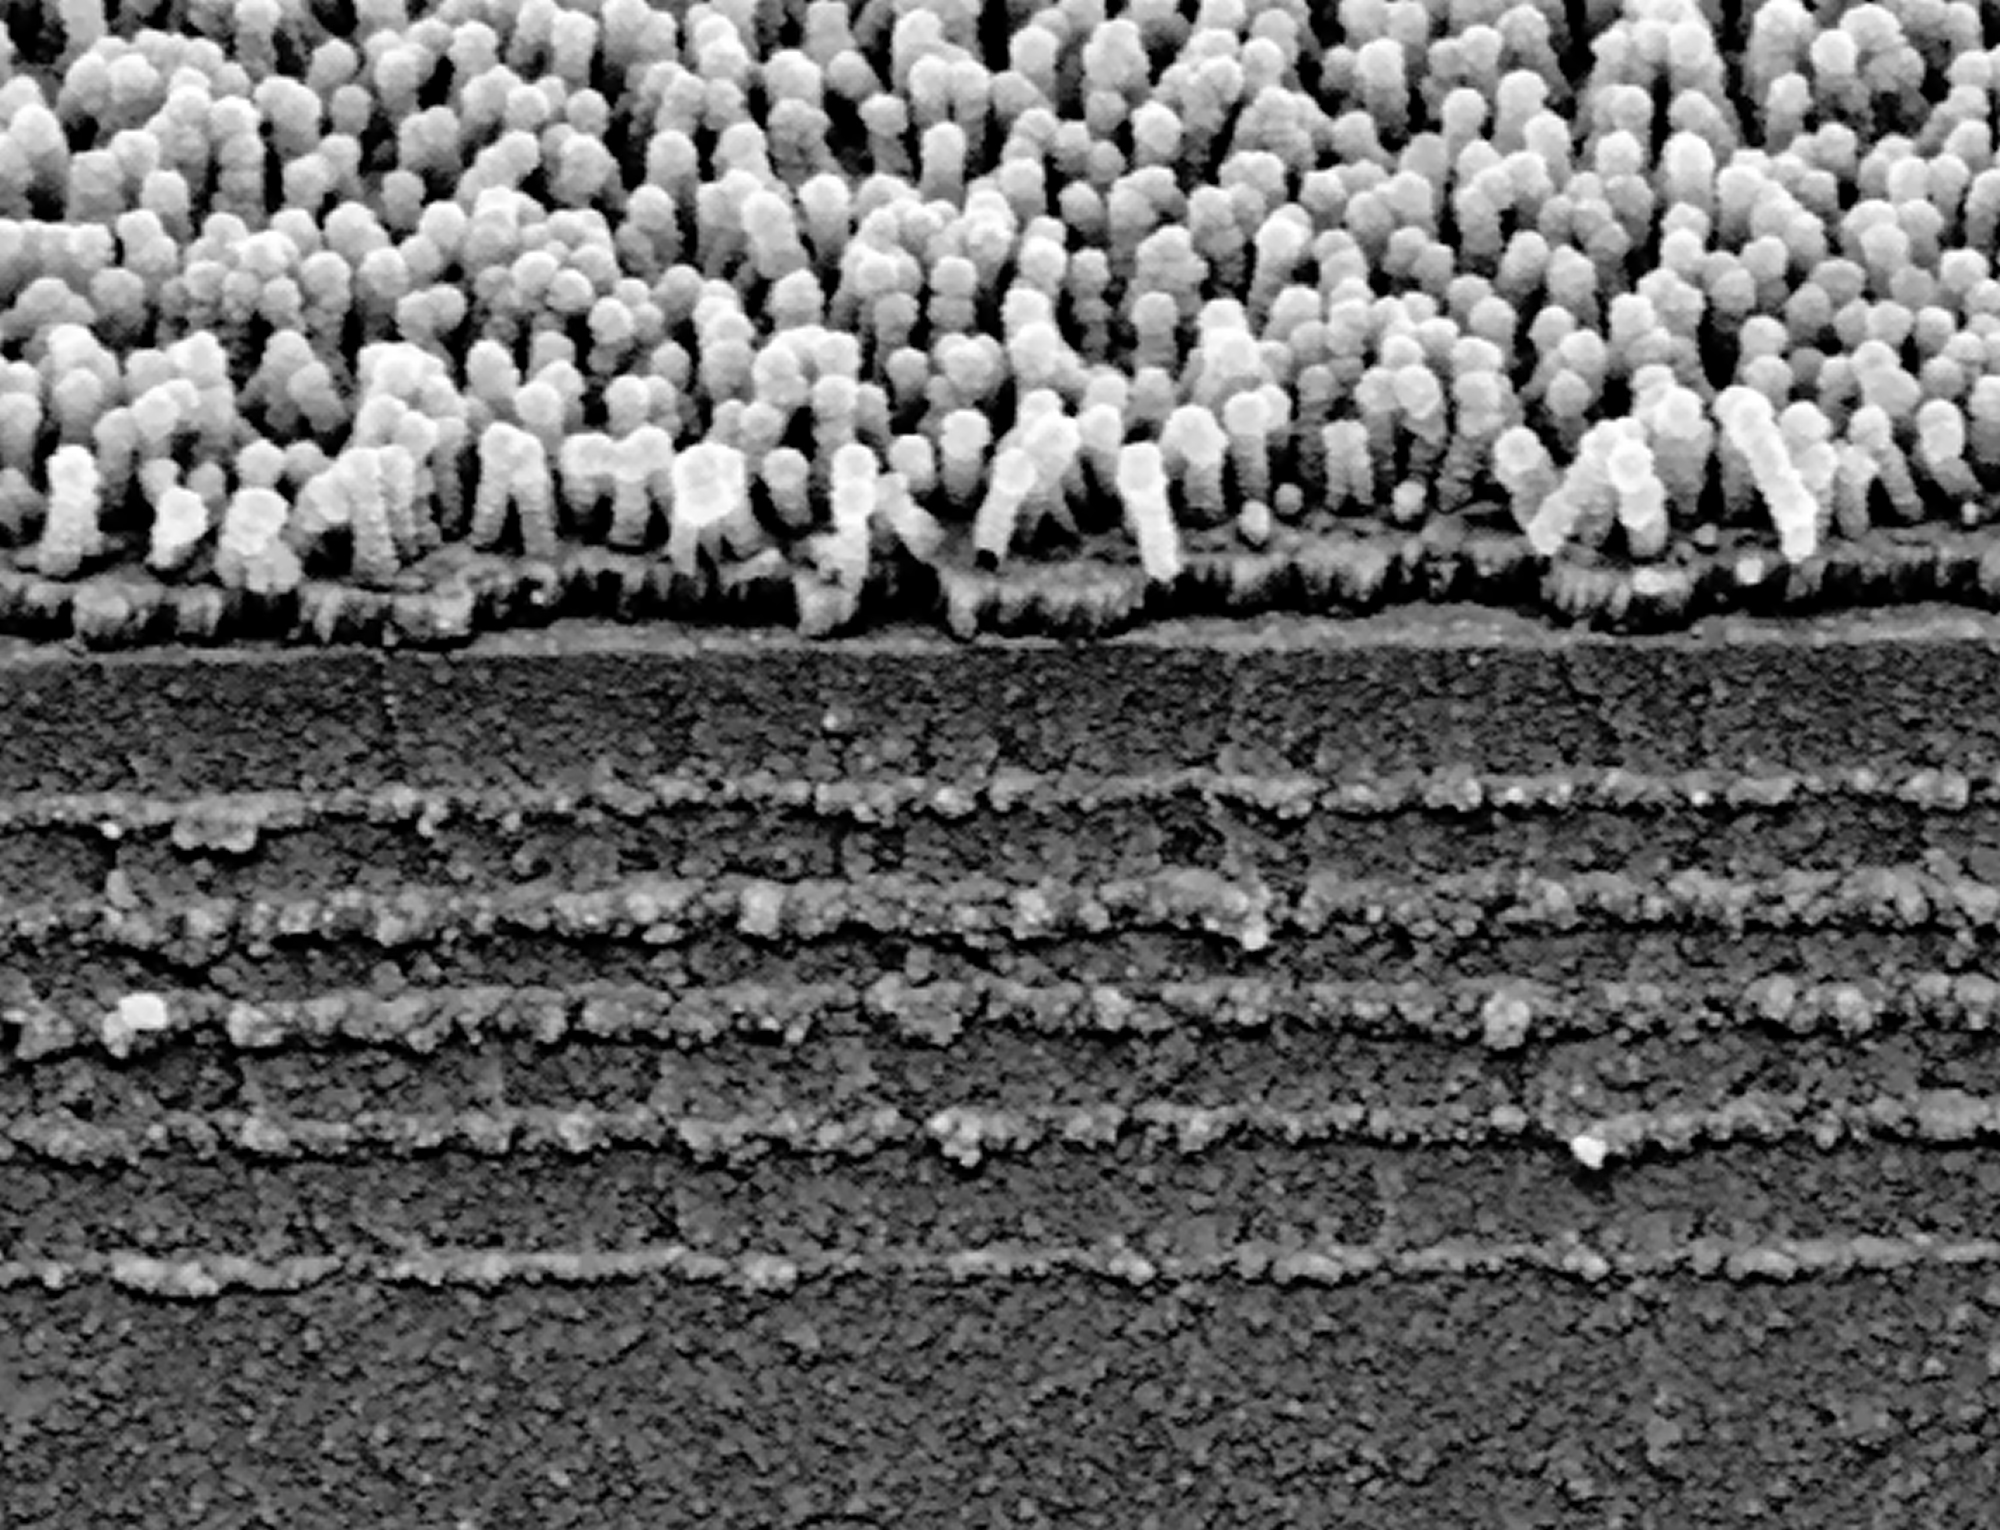 Fig. 2: Scanning electron micrograph of interference stack with nanostructured organic layer as the top layer.